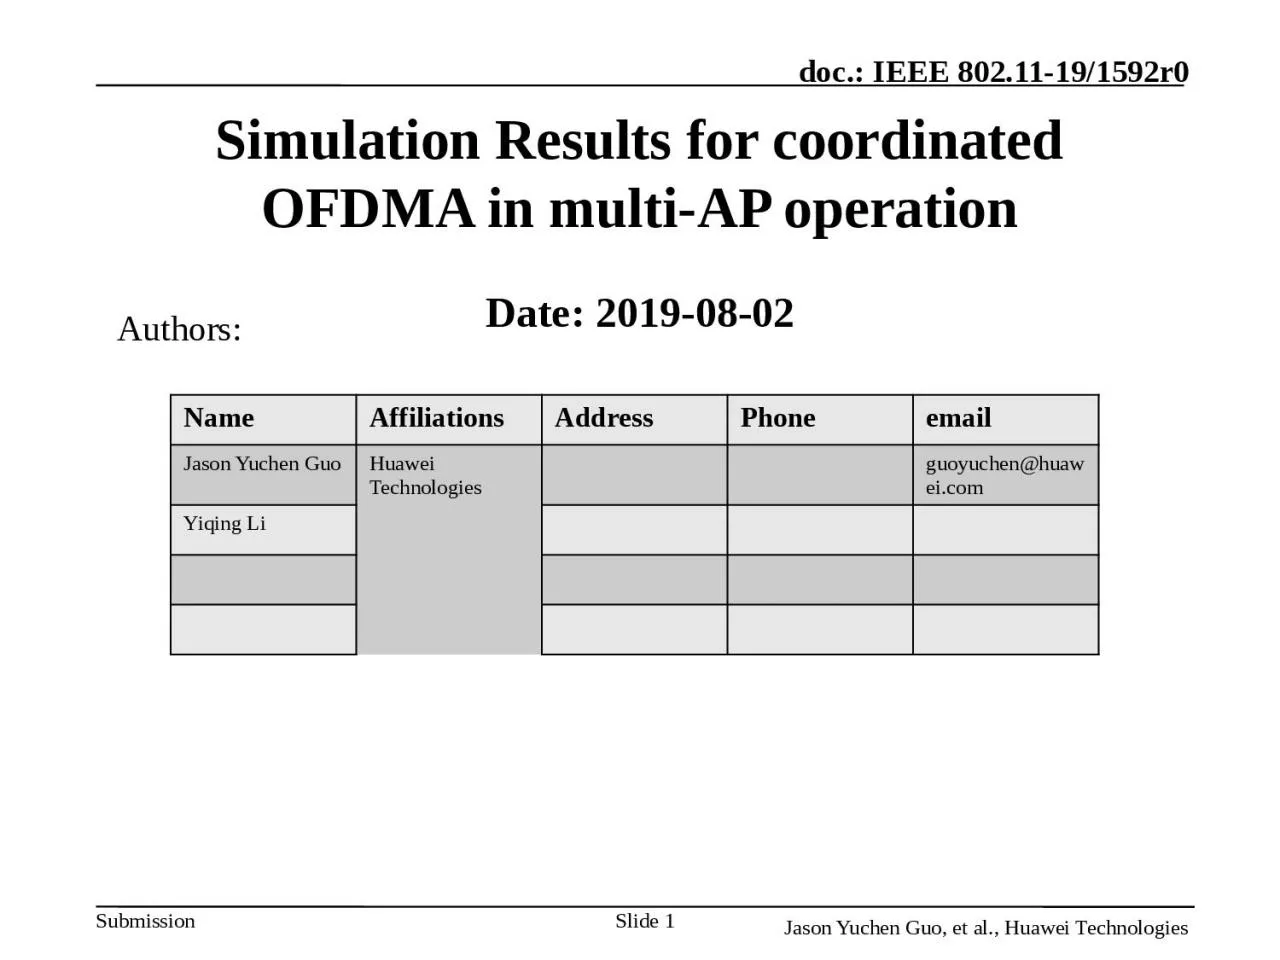 Simulation Results for coordinated OFDMA in